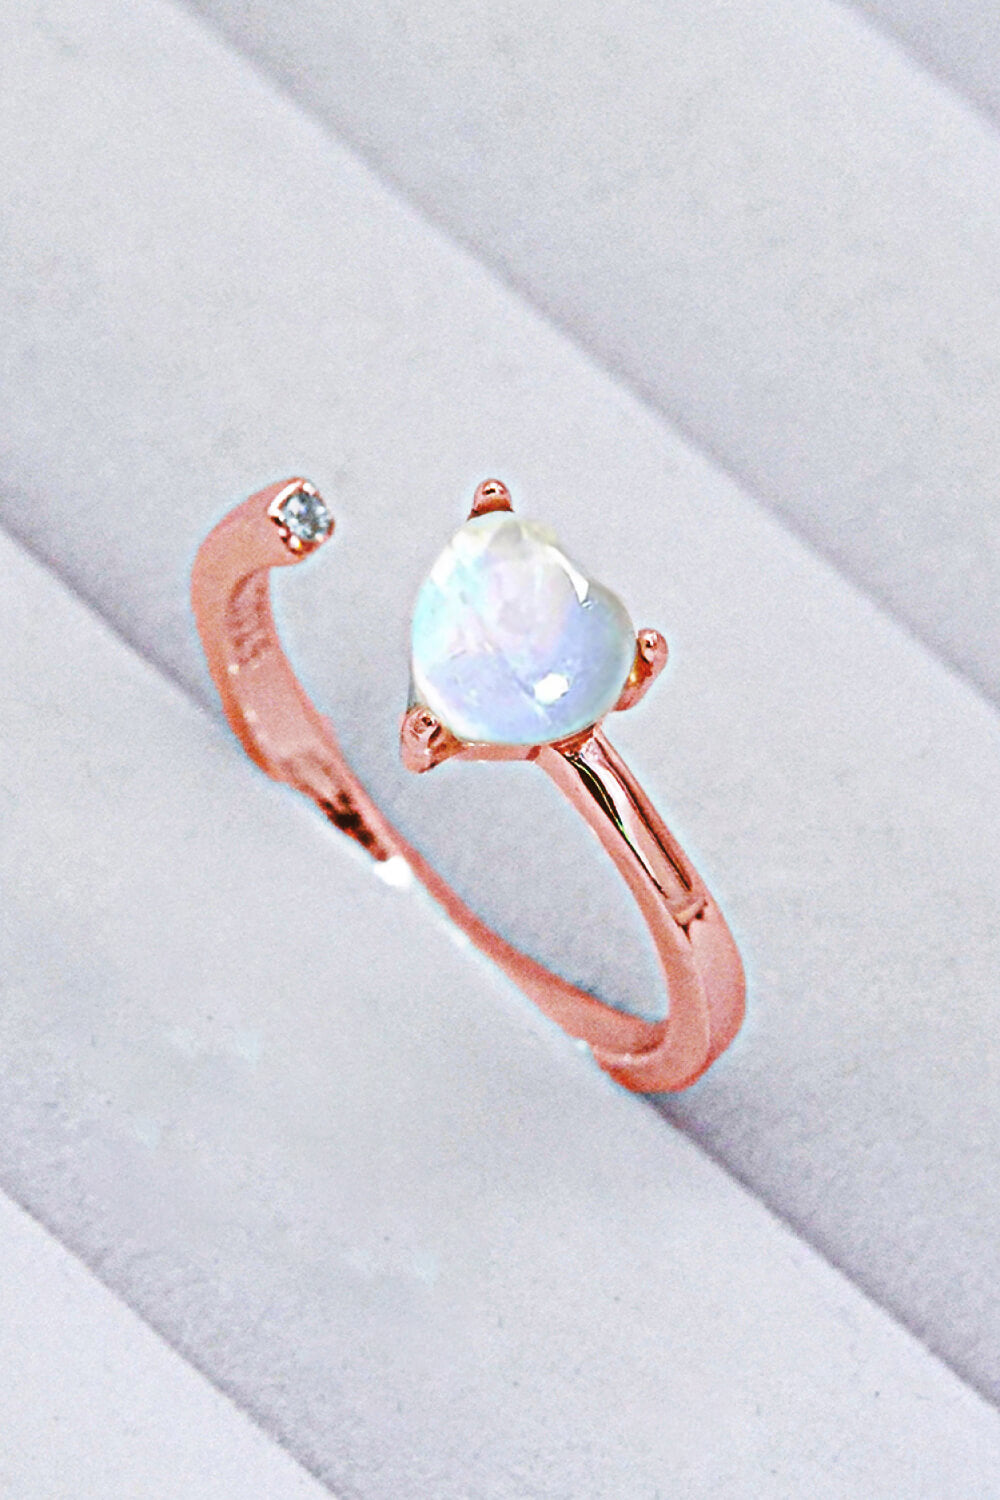 Inlaid Moonstone Heart Adjustable Open Ring